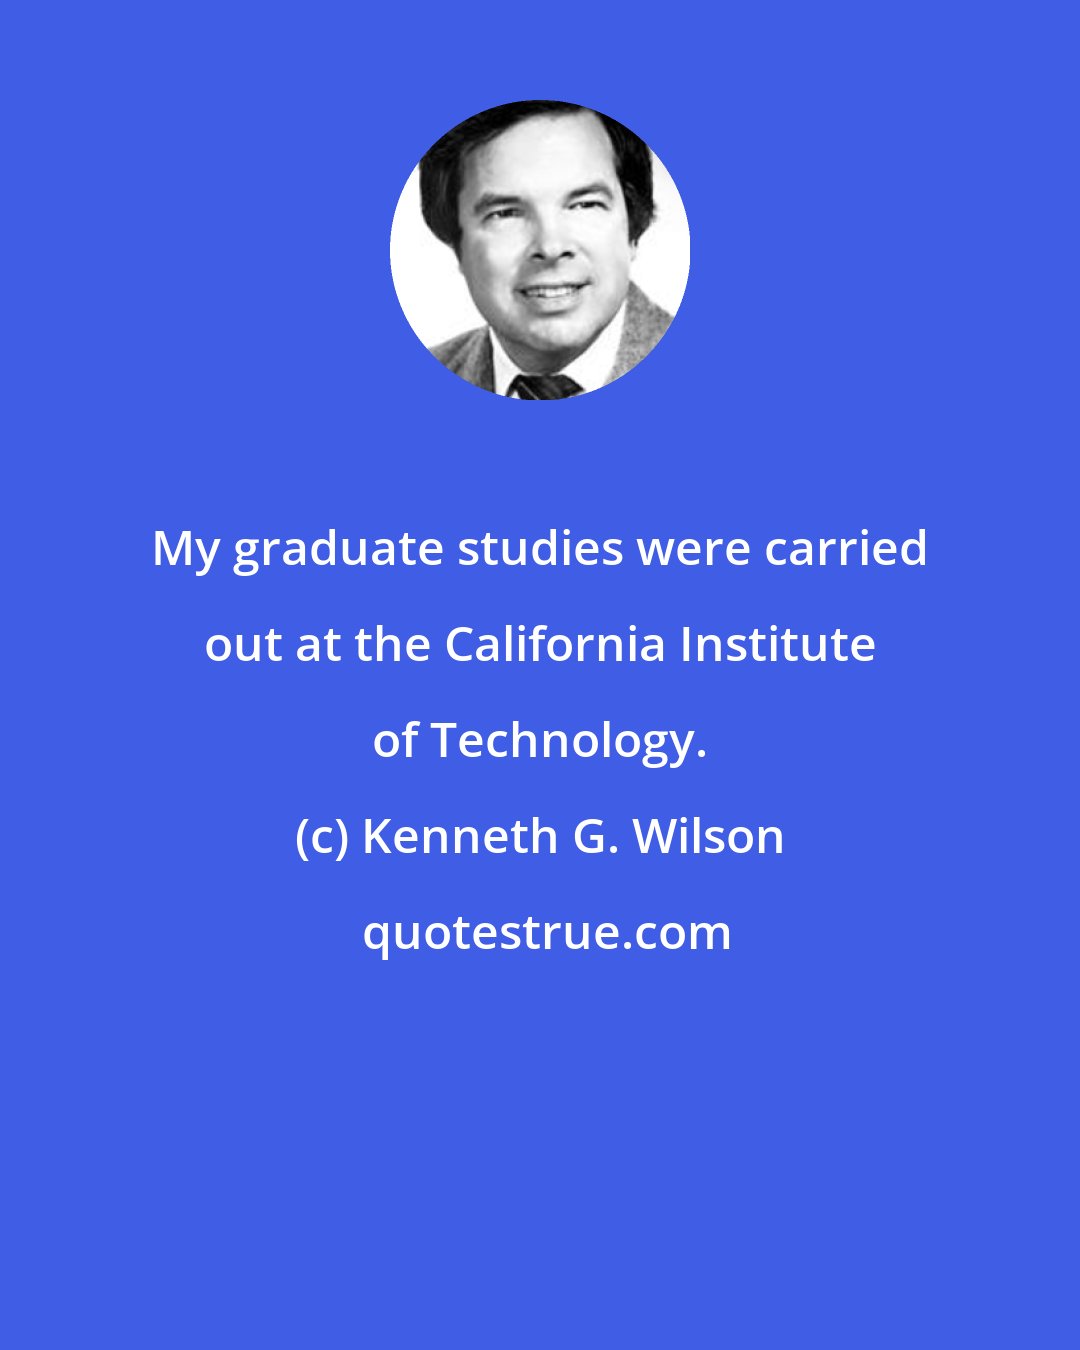 Kenneth G. Wilson: My graduate studies were carried out at the California Institute of Technology.